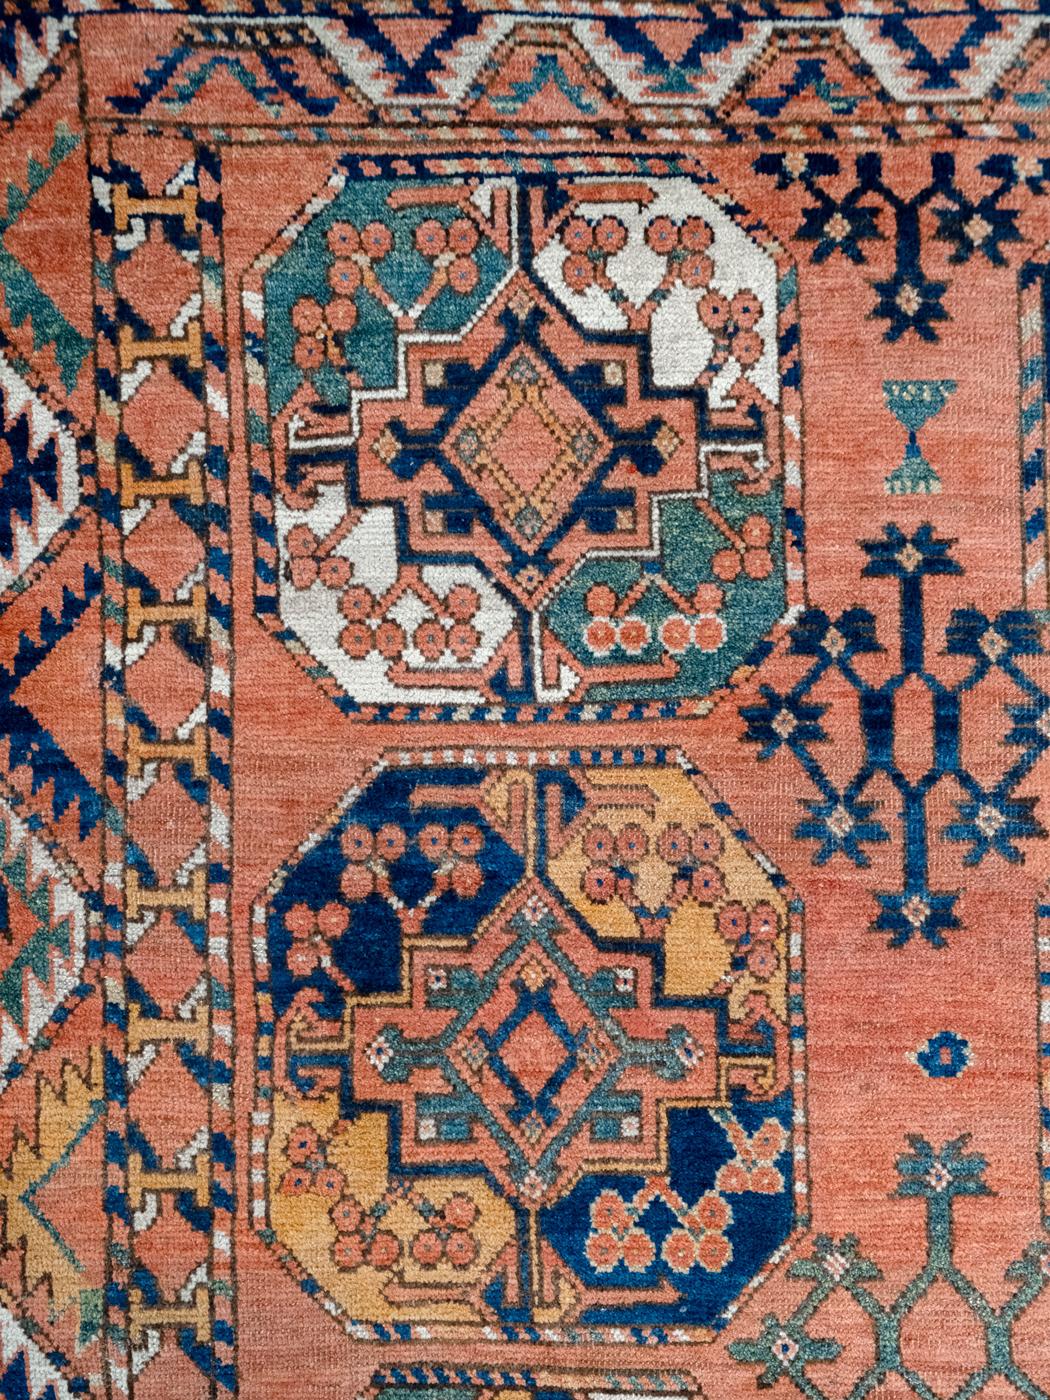 Showcasing bright and bold shades of rose, red, green, indigo, cream, orange, pink, and black wool, this Antique Persian Esari carpet measures 7’2” x 9’ and was woven in Iran circa 1880. With 18 large and colorful medallions decorated with garlands